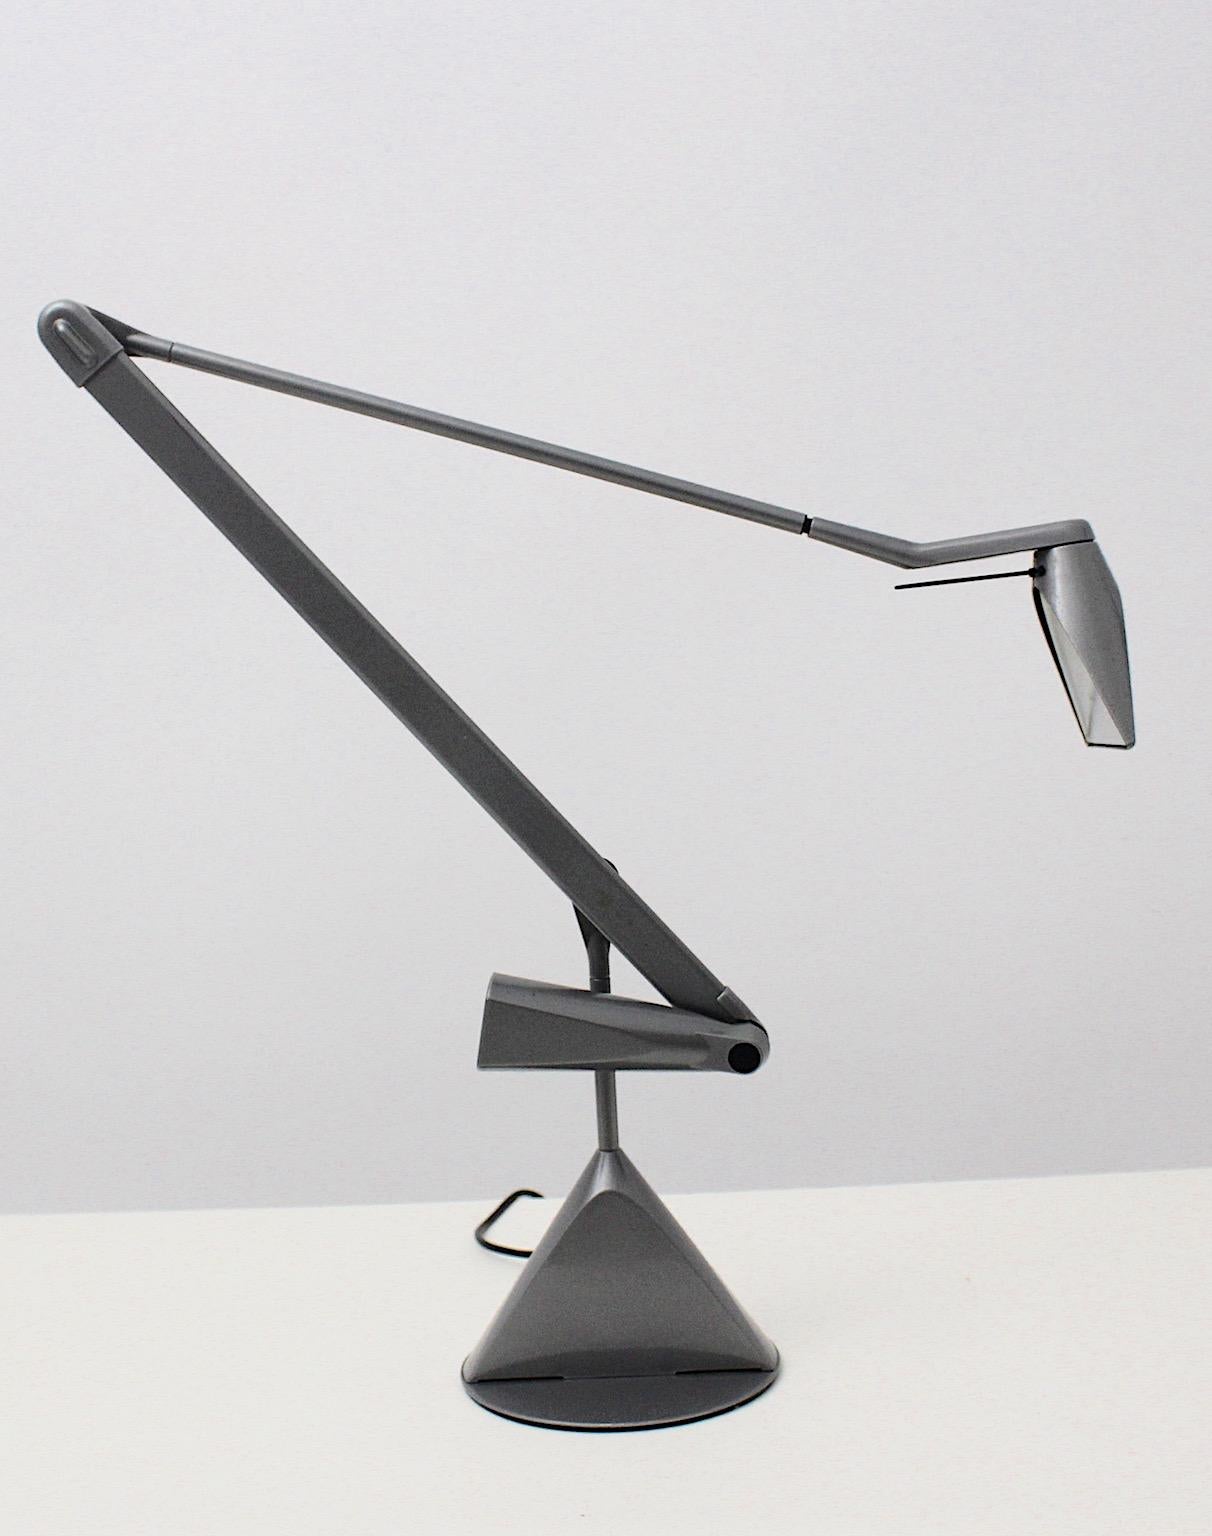 Modern vintage grey desk lam, architects lamp or table lamp model Zelig designed by Walter A. Monici for lumina Italy, 1980s.
The desk lamp shows an adjustable construction from 52 cm to 133 cm.
Two step switch
Stamped underneath 
Very good